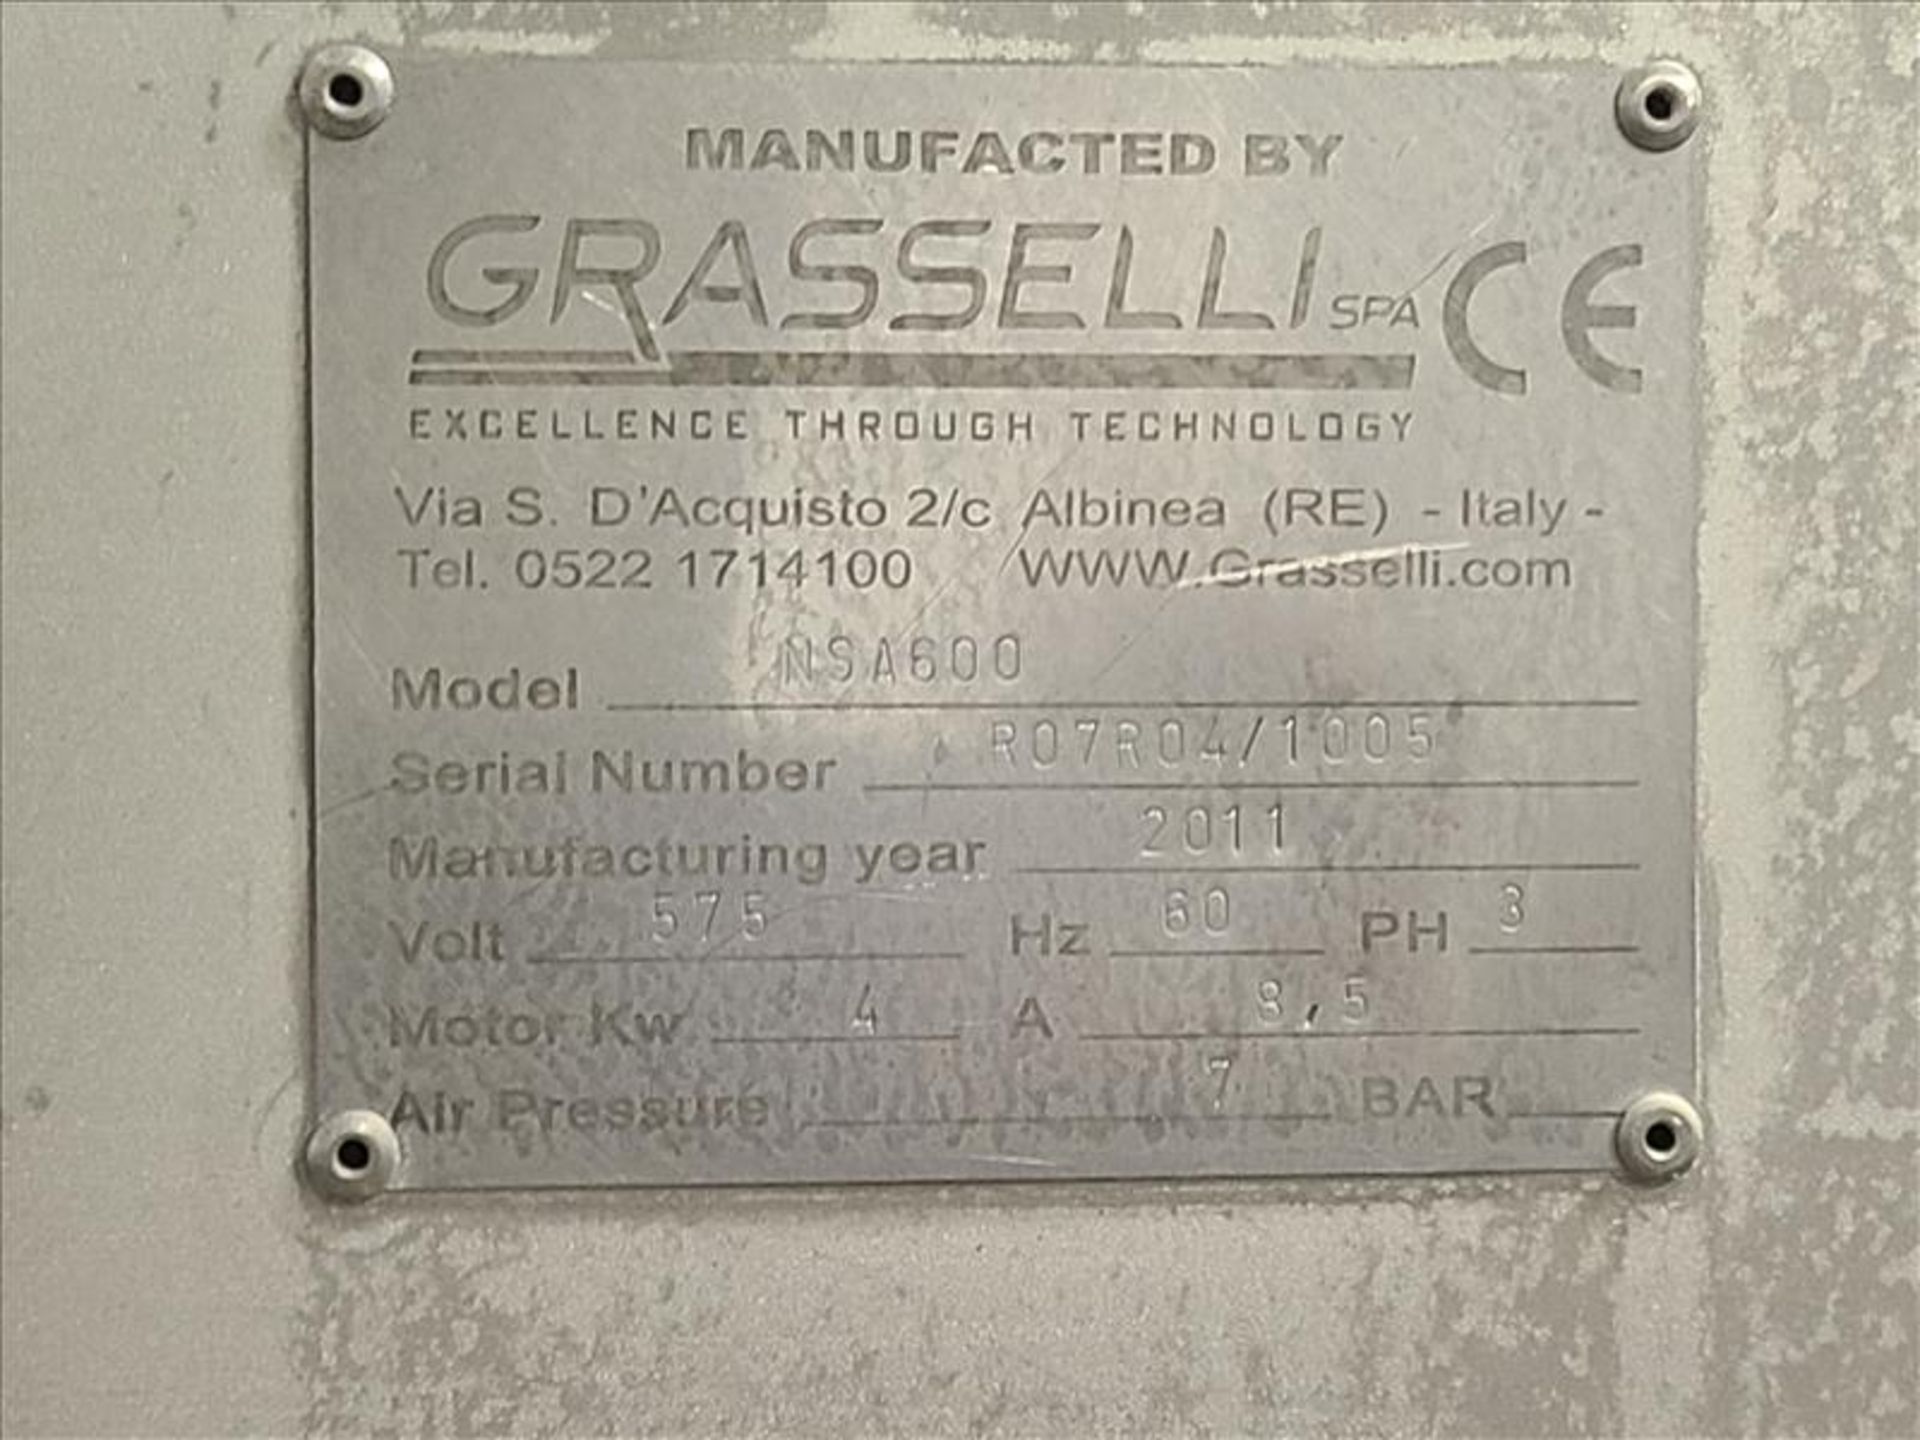 Grasselli slicer, mod. NSA600, ser. no. R07R04/1005, stainless steel [Loc. Packaging/Thigh Line] - Image 4 of 4